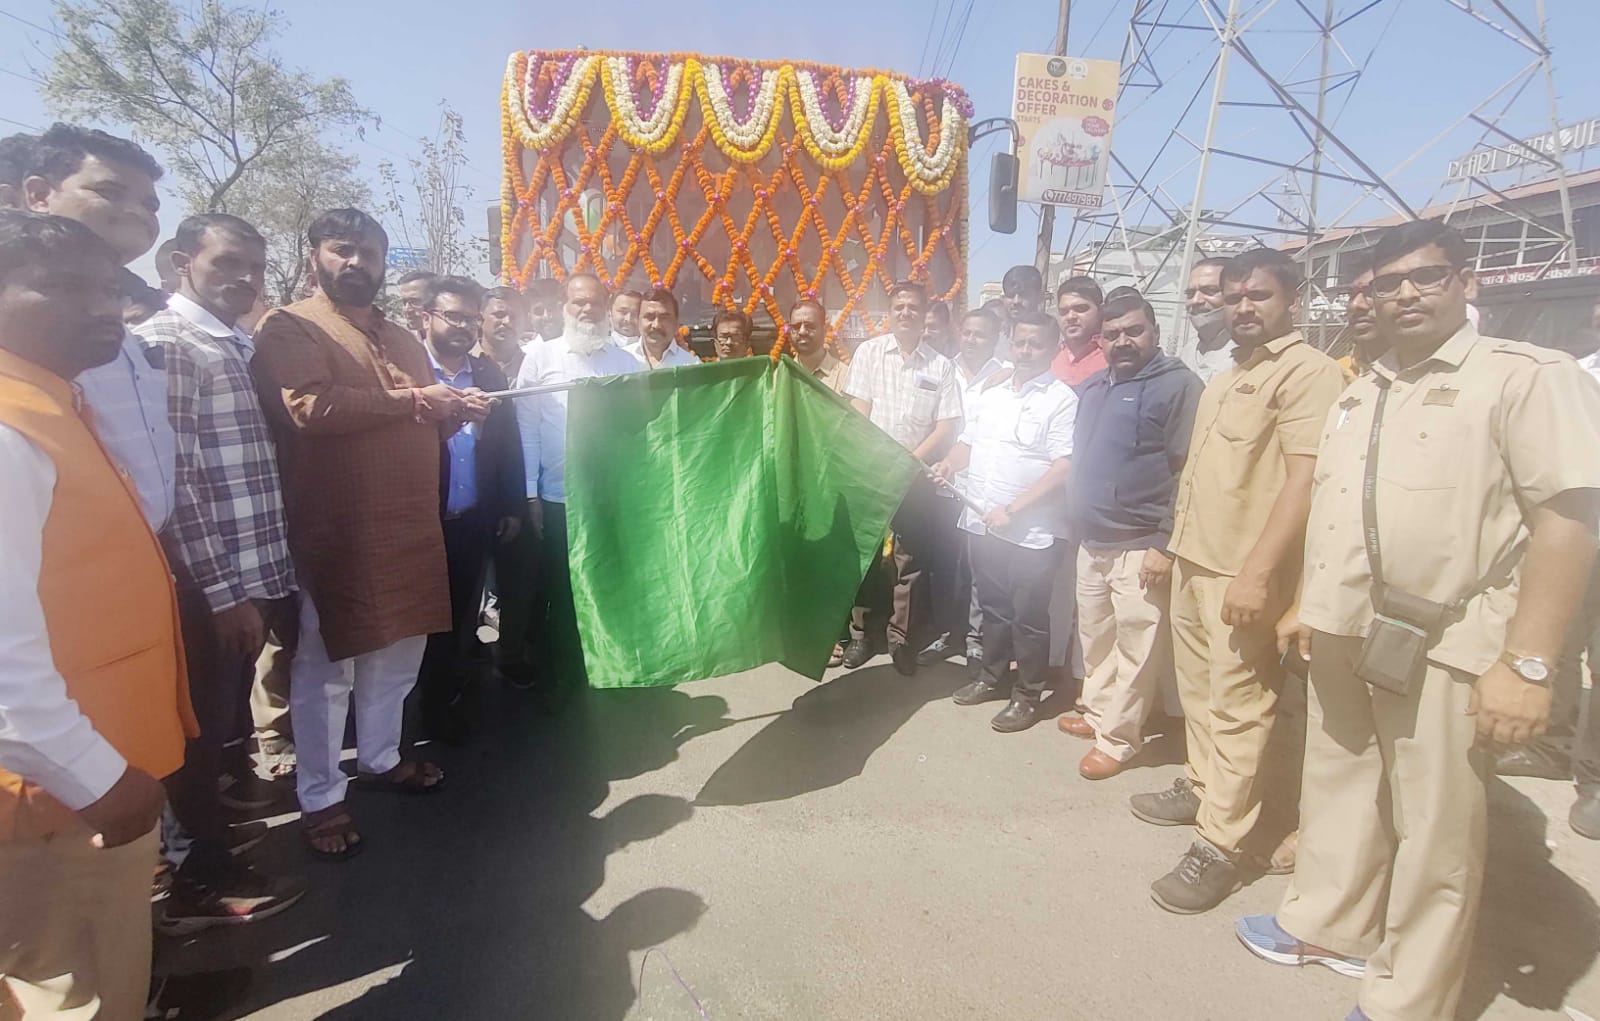 Come on. Dedication of new bus route from Bhosari to Pabal by Mahesh Landage: Adv. Nitin Landage